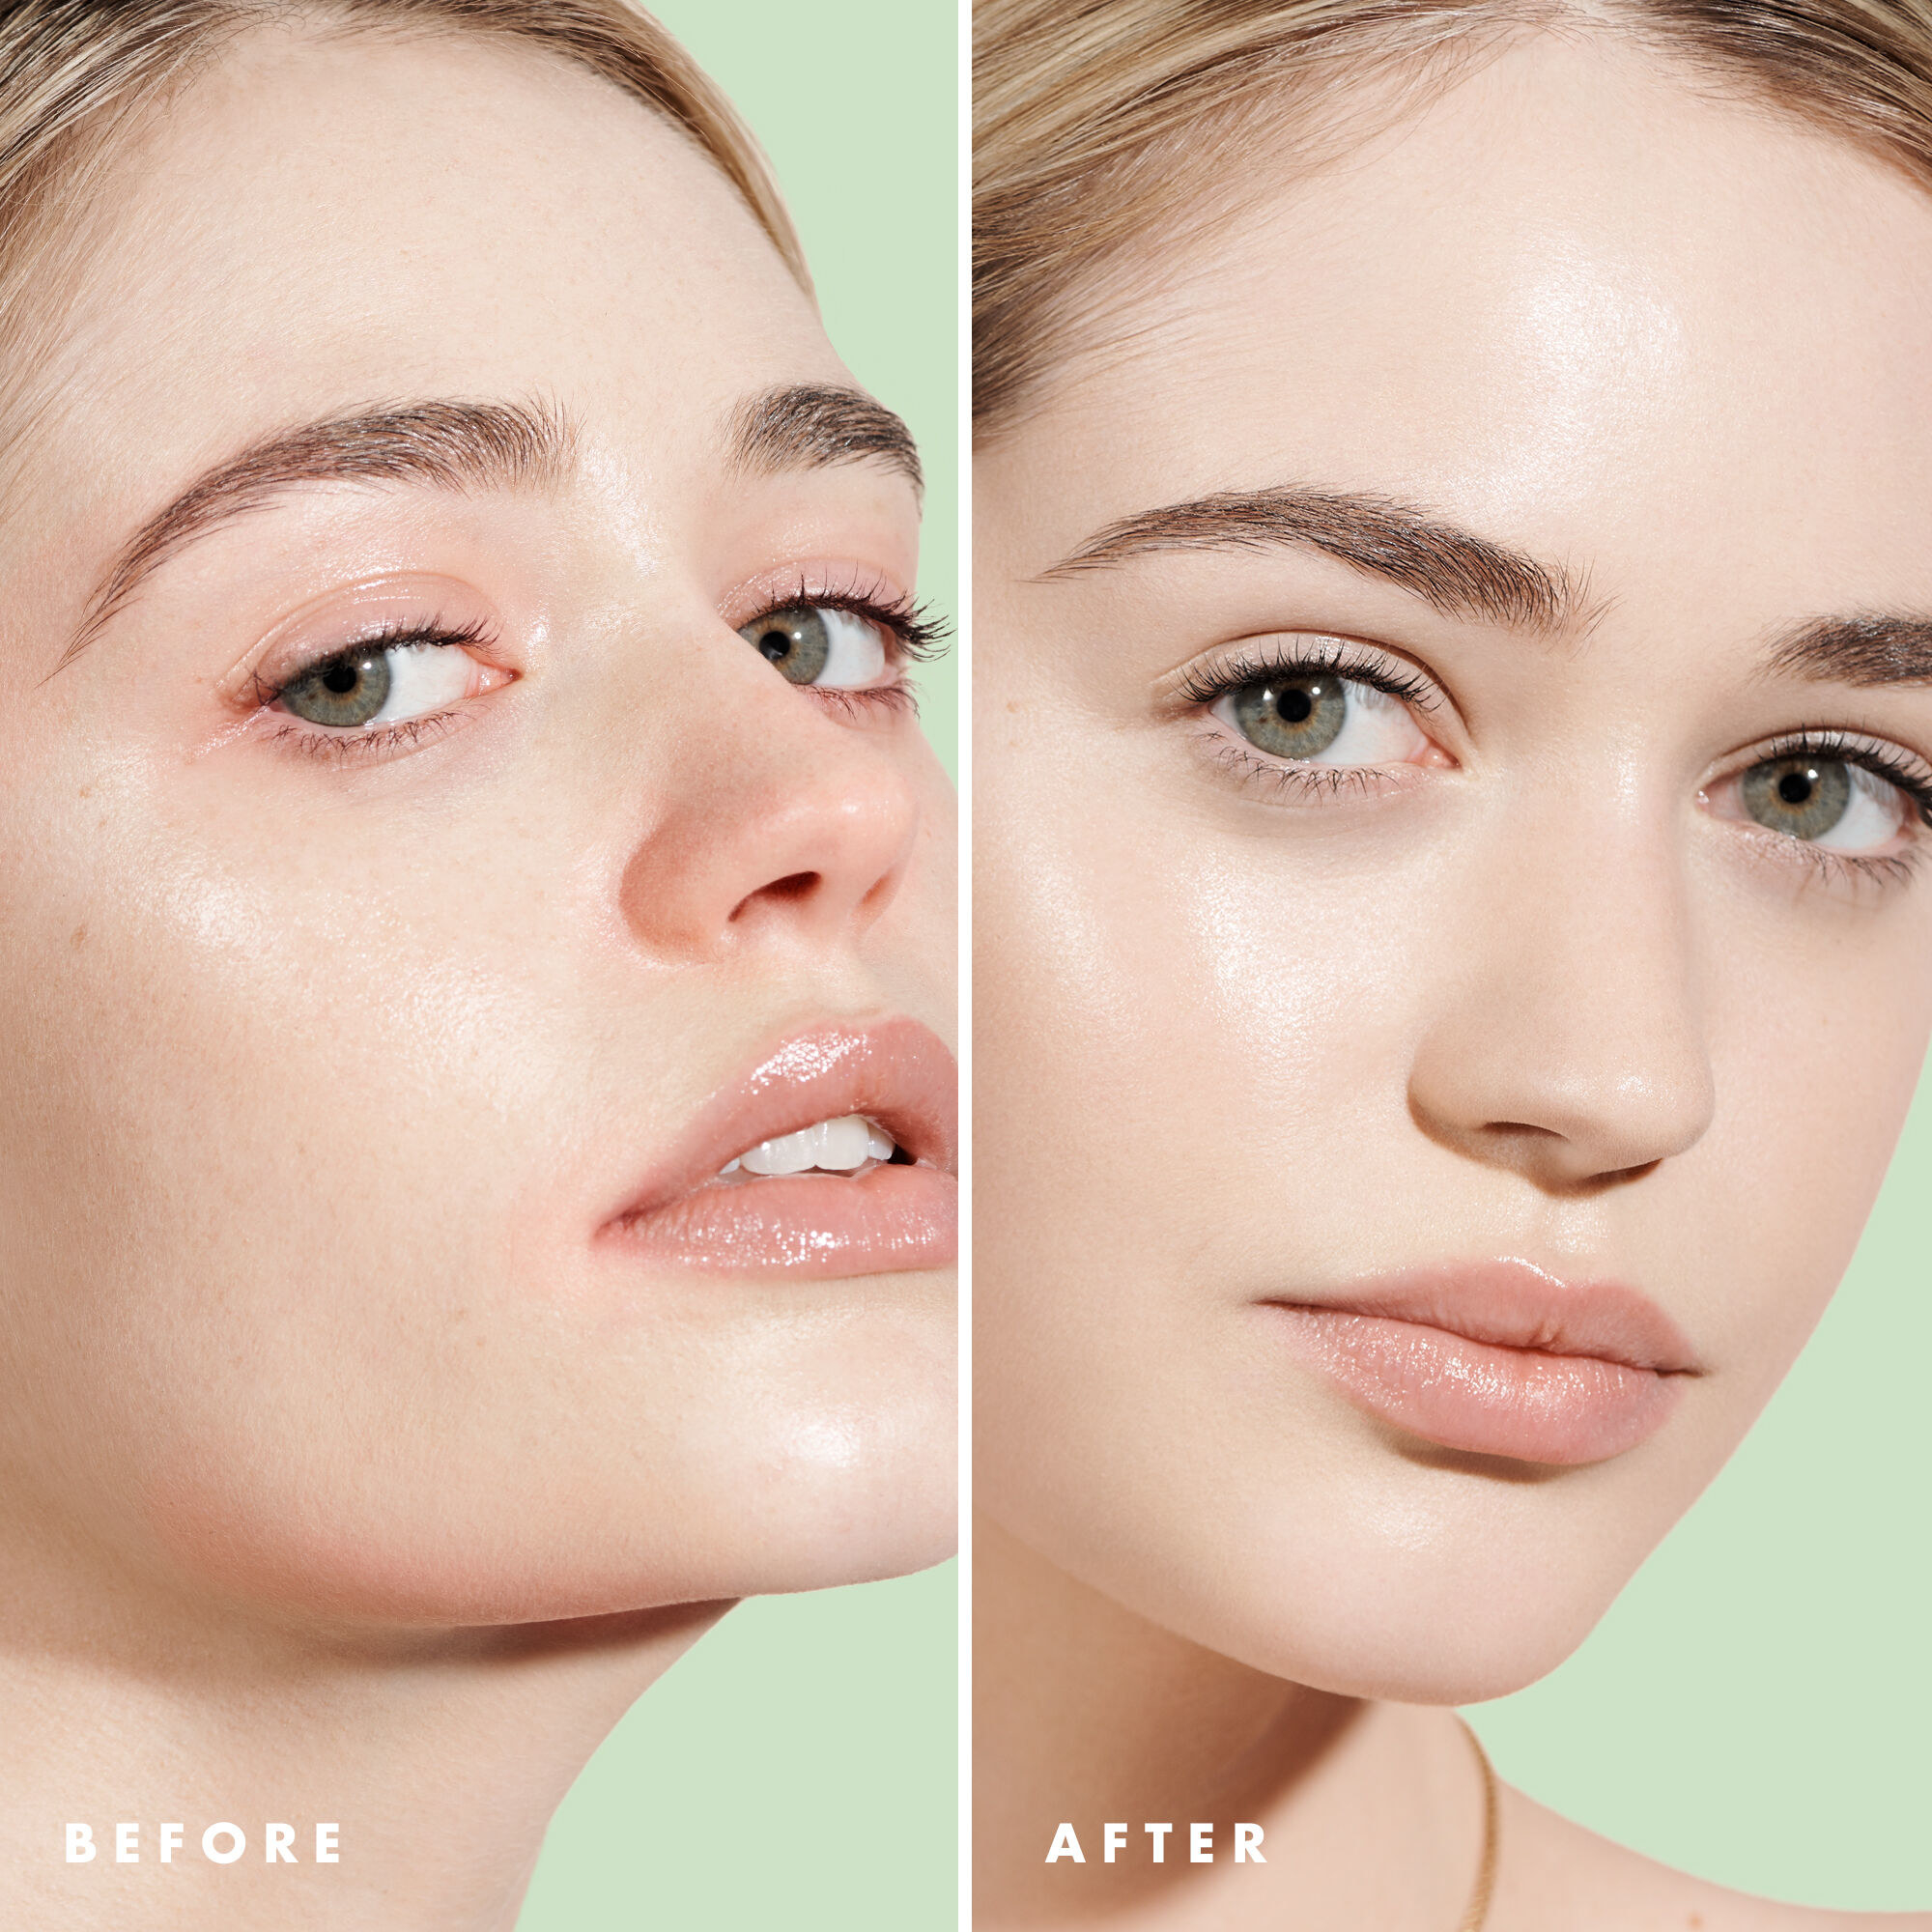 model before and after of their face with texture and redness and their neutralized tone from using the primer